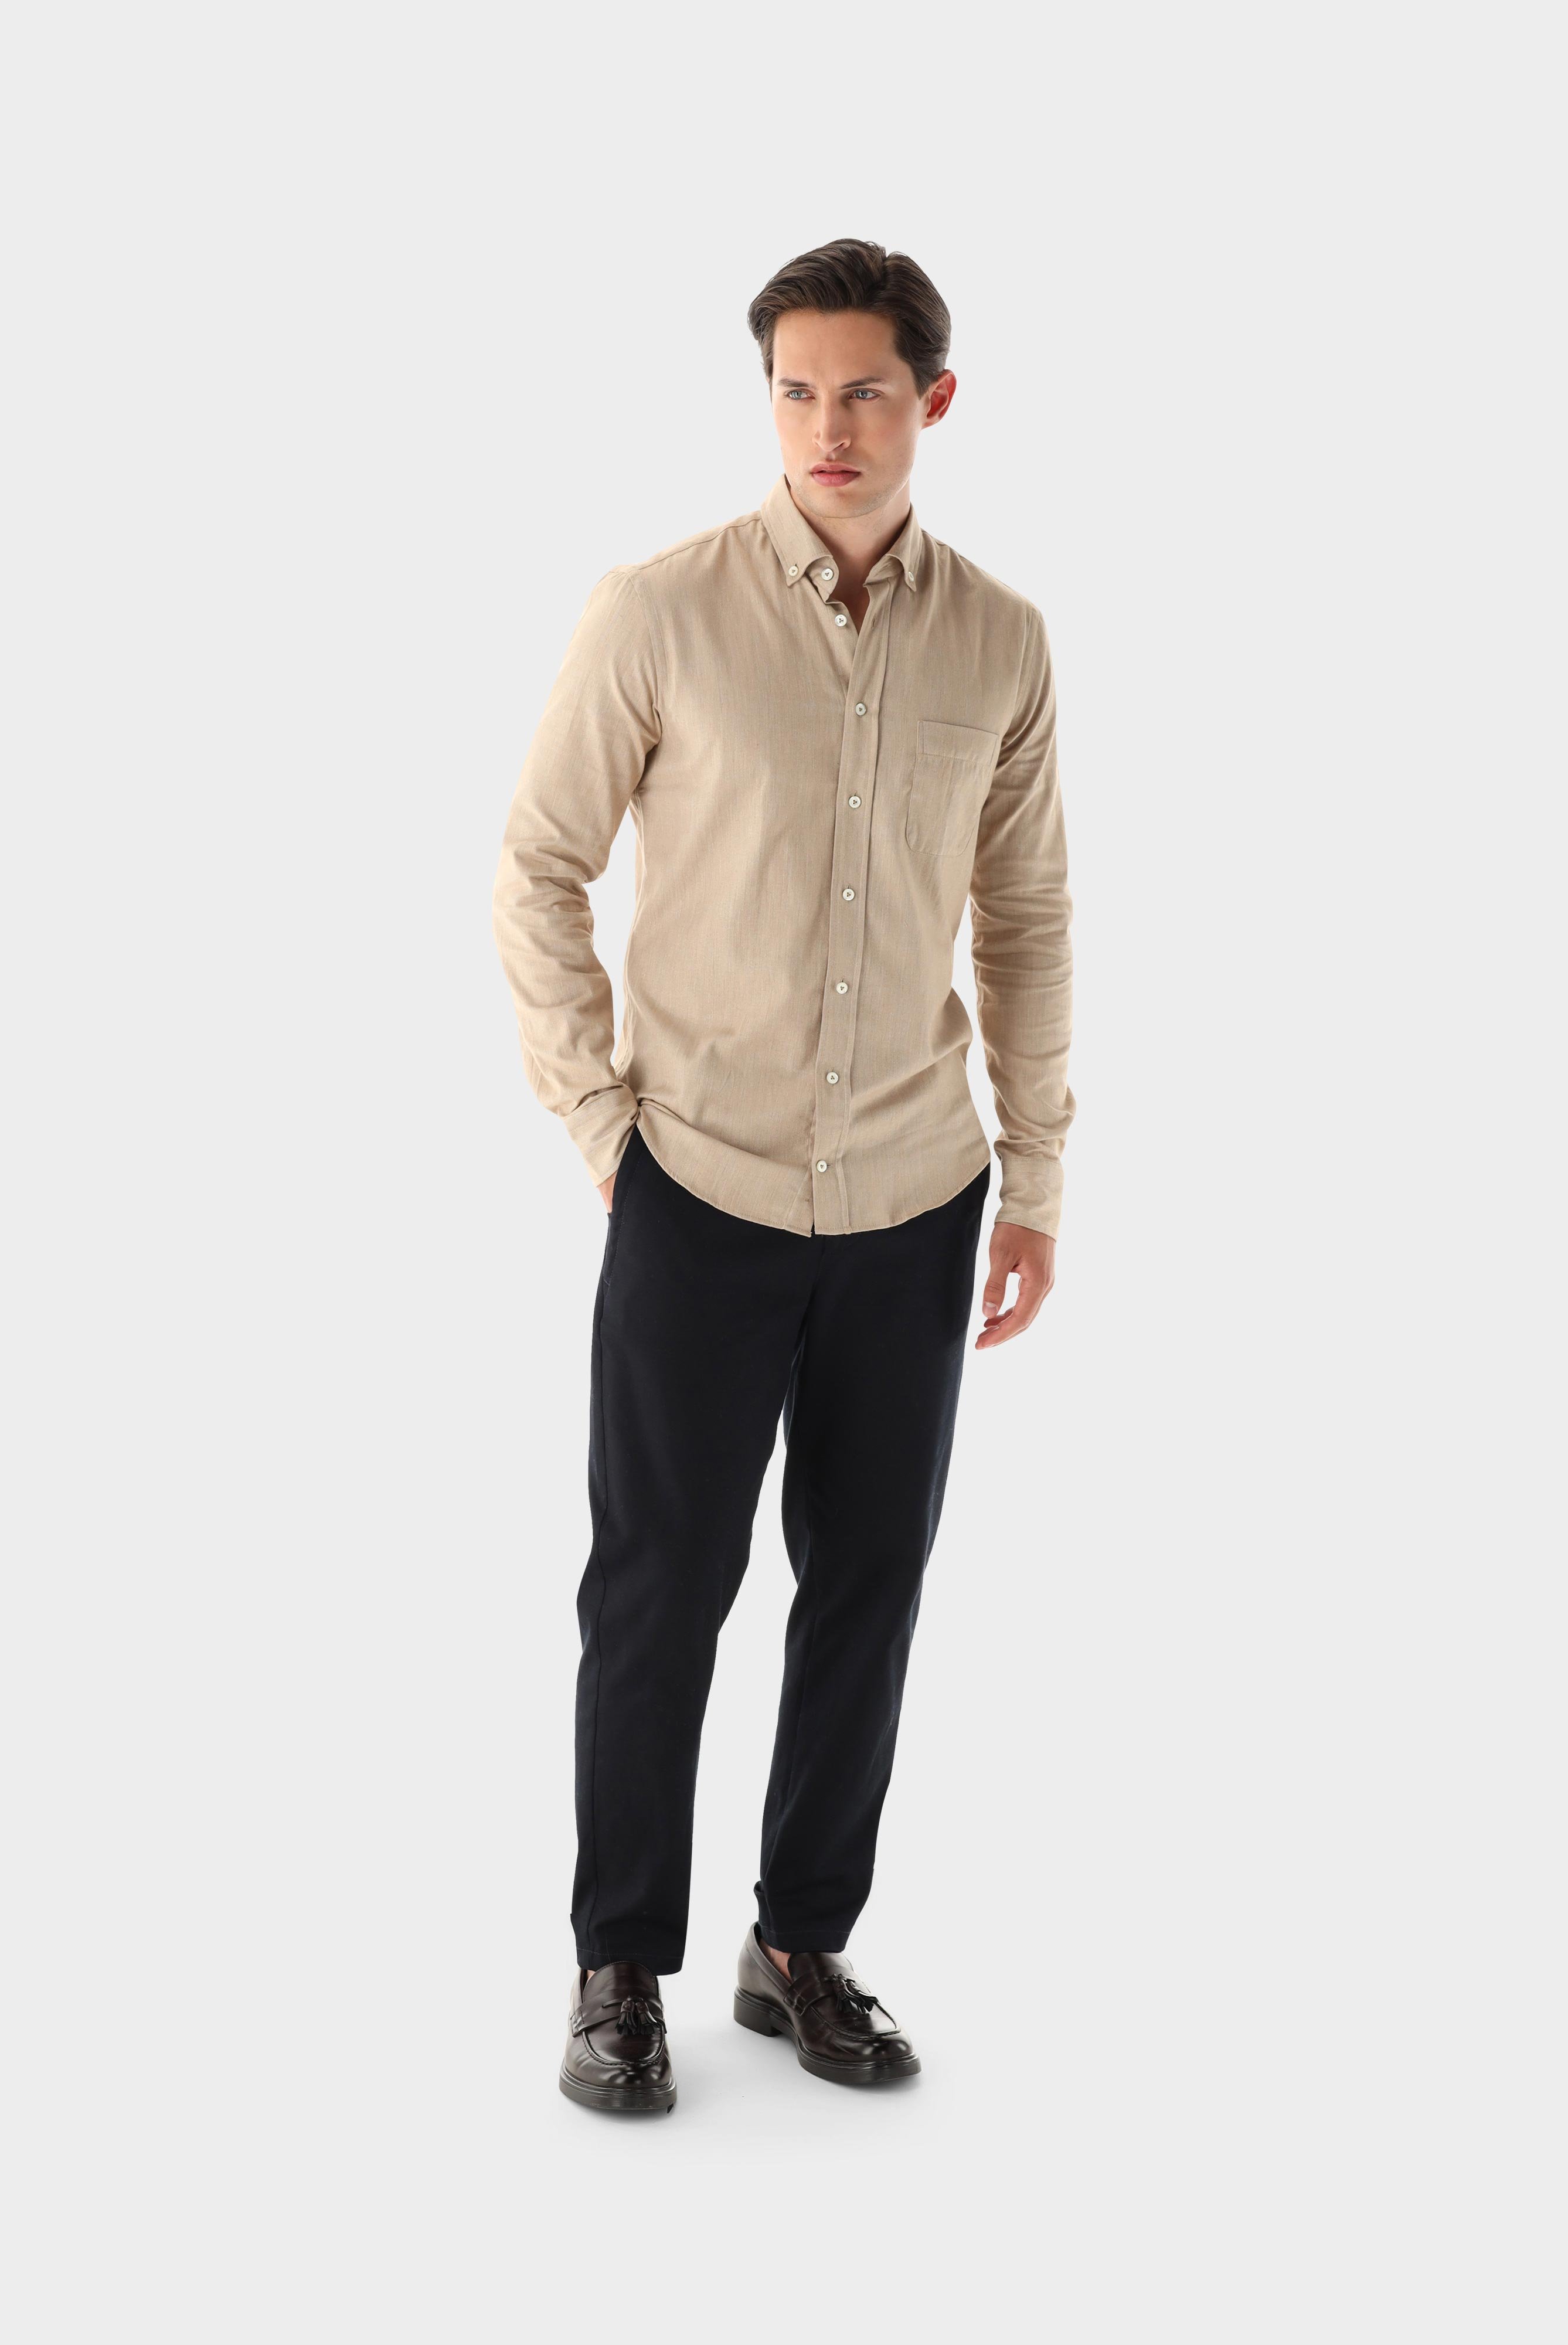 Casual Hemden+Button-Down Flanellhemd Tailor Fit+20.2013.9V.155045.130.39